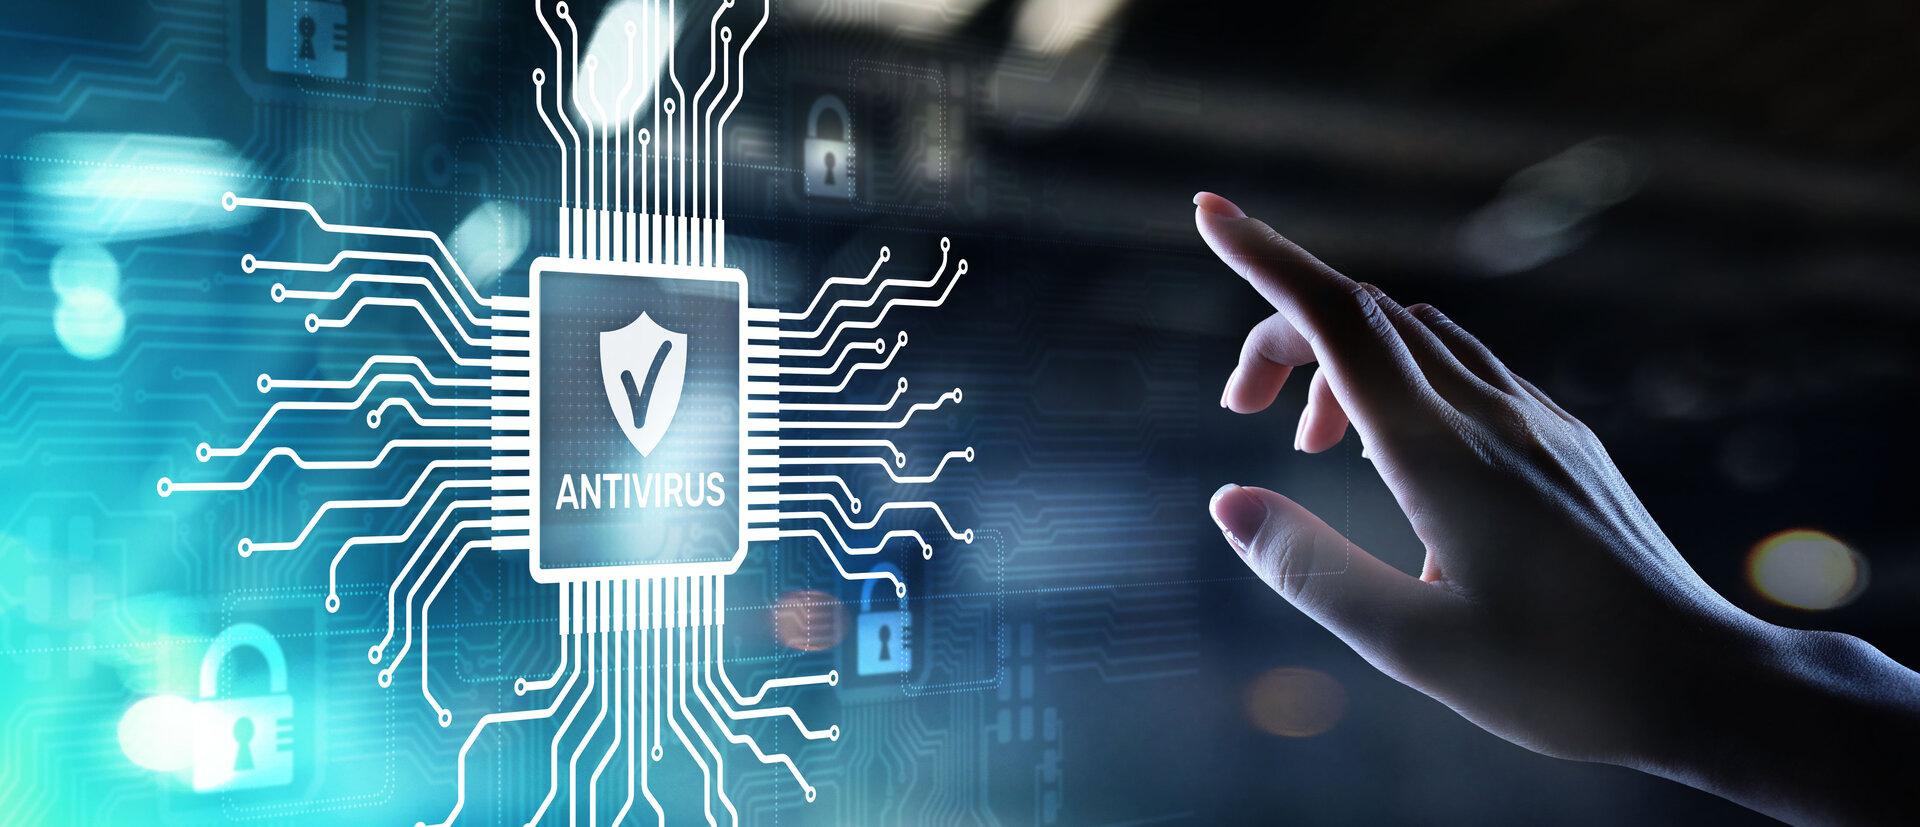 Antivirus & Cyber security & Data protection